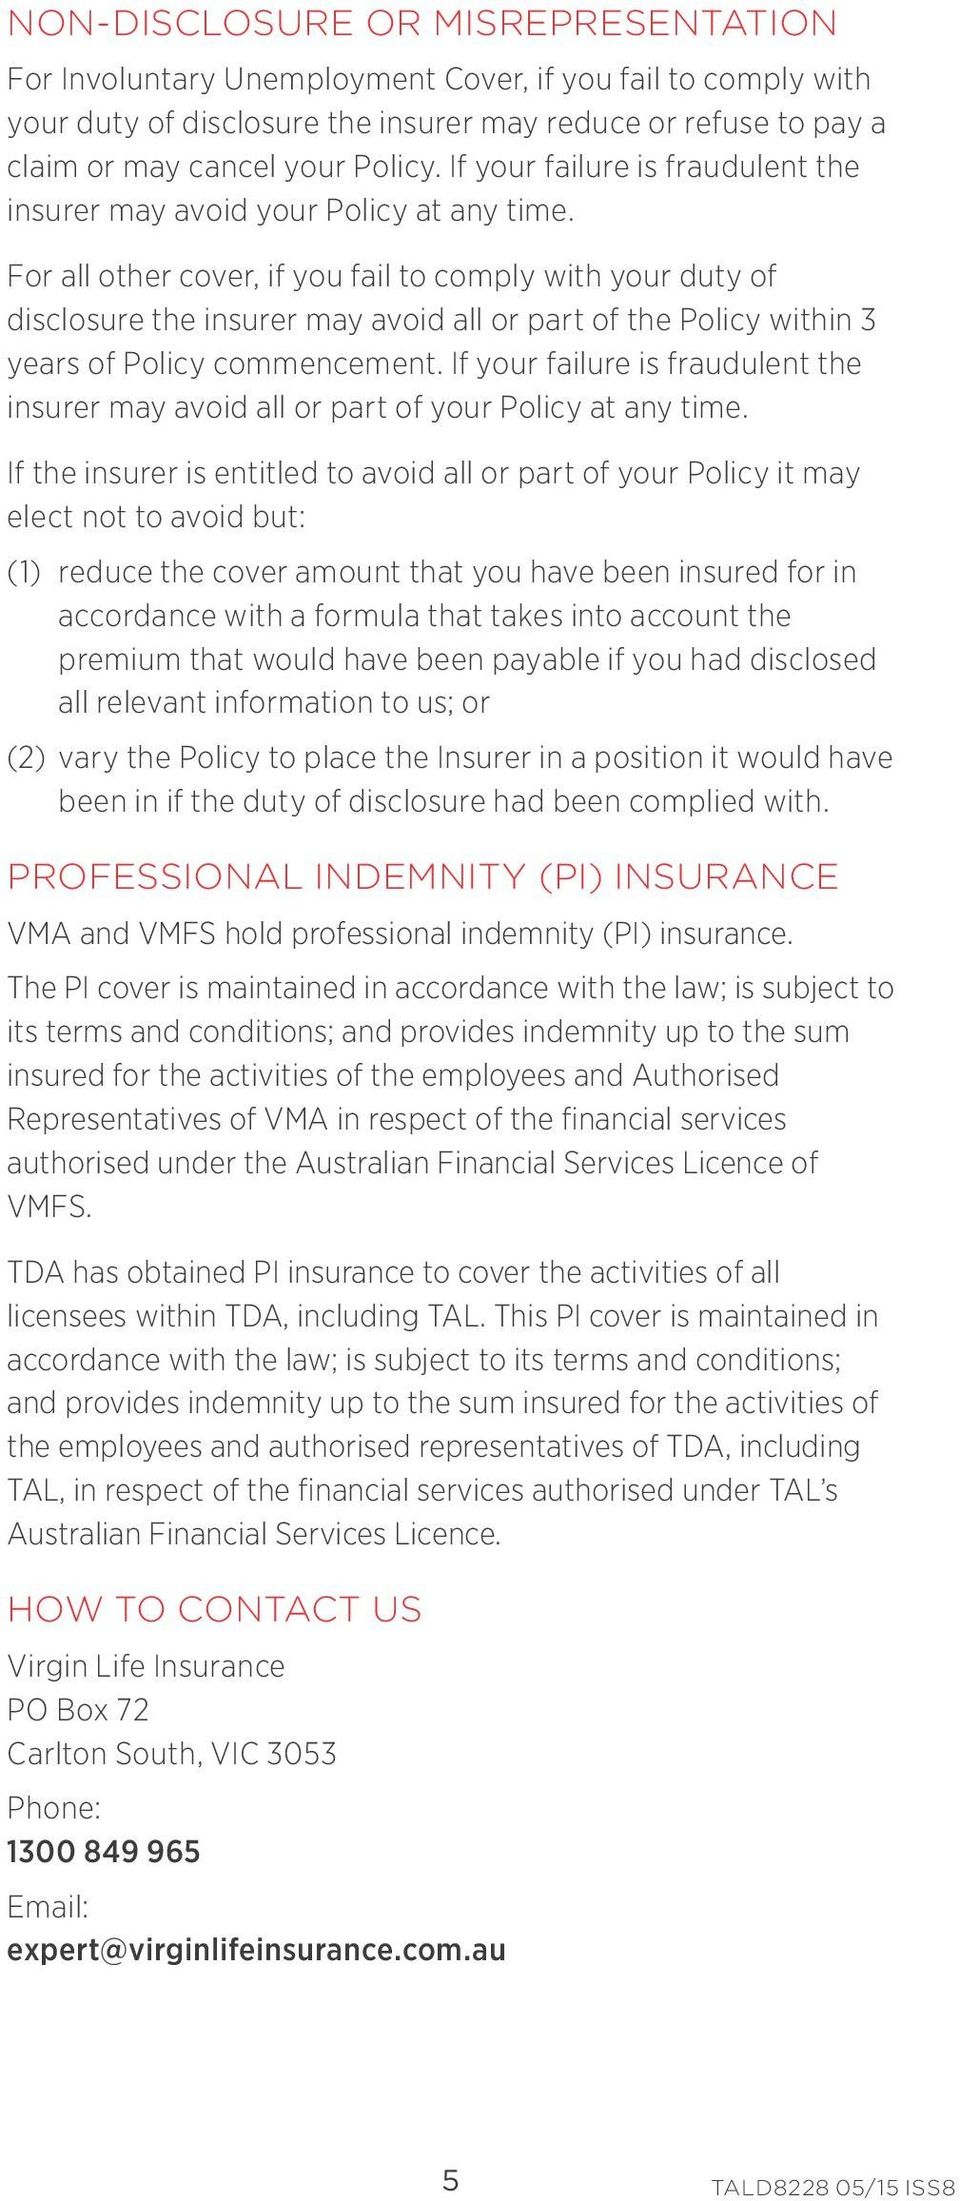 For all other cover, if you fail to comply with your duty of disclosure the insurer may avoid all or part of the Policy within 3 years of Policy commencement.